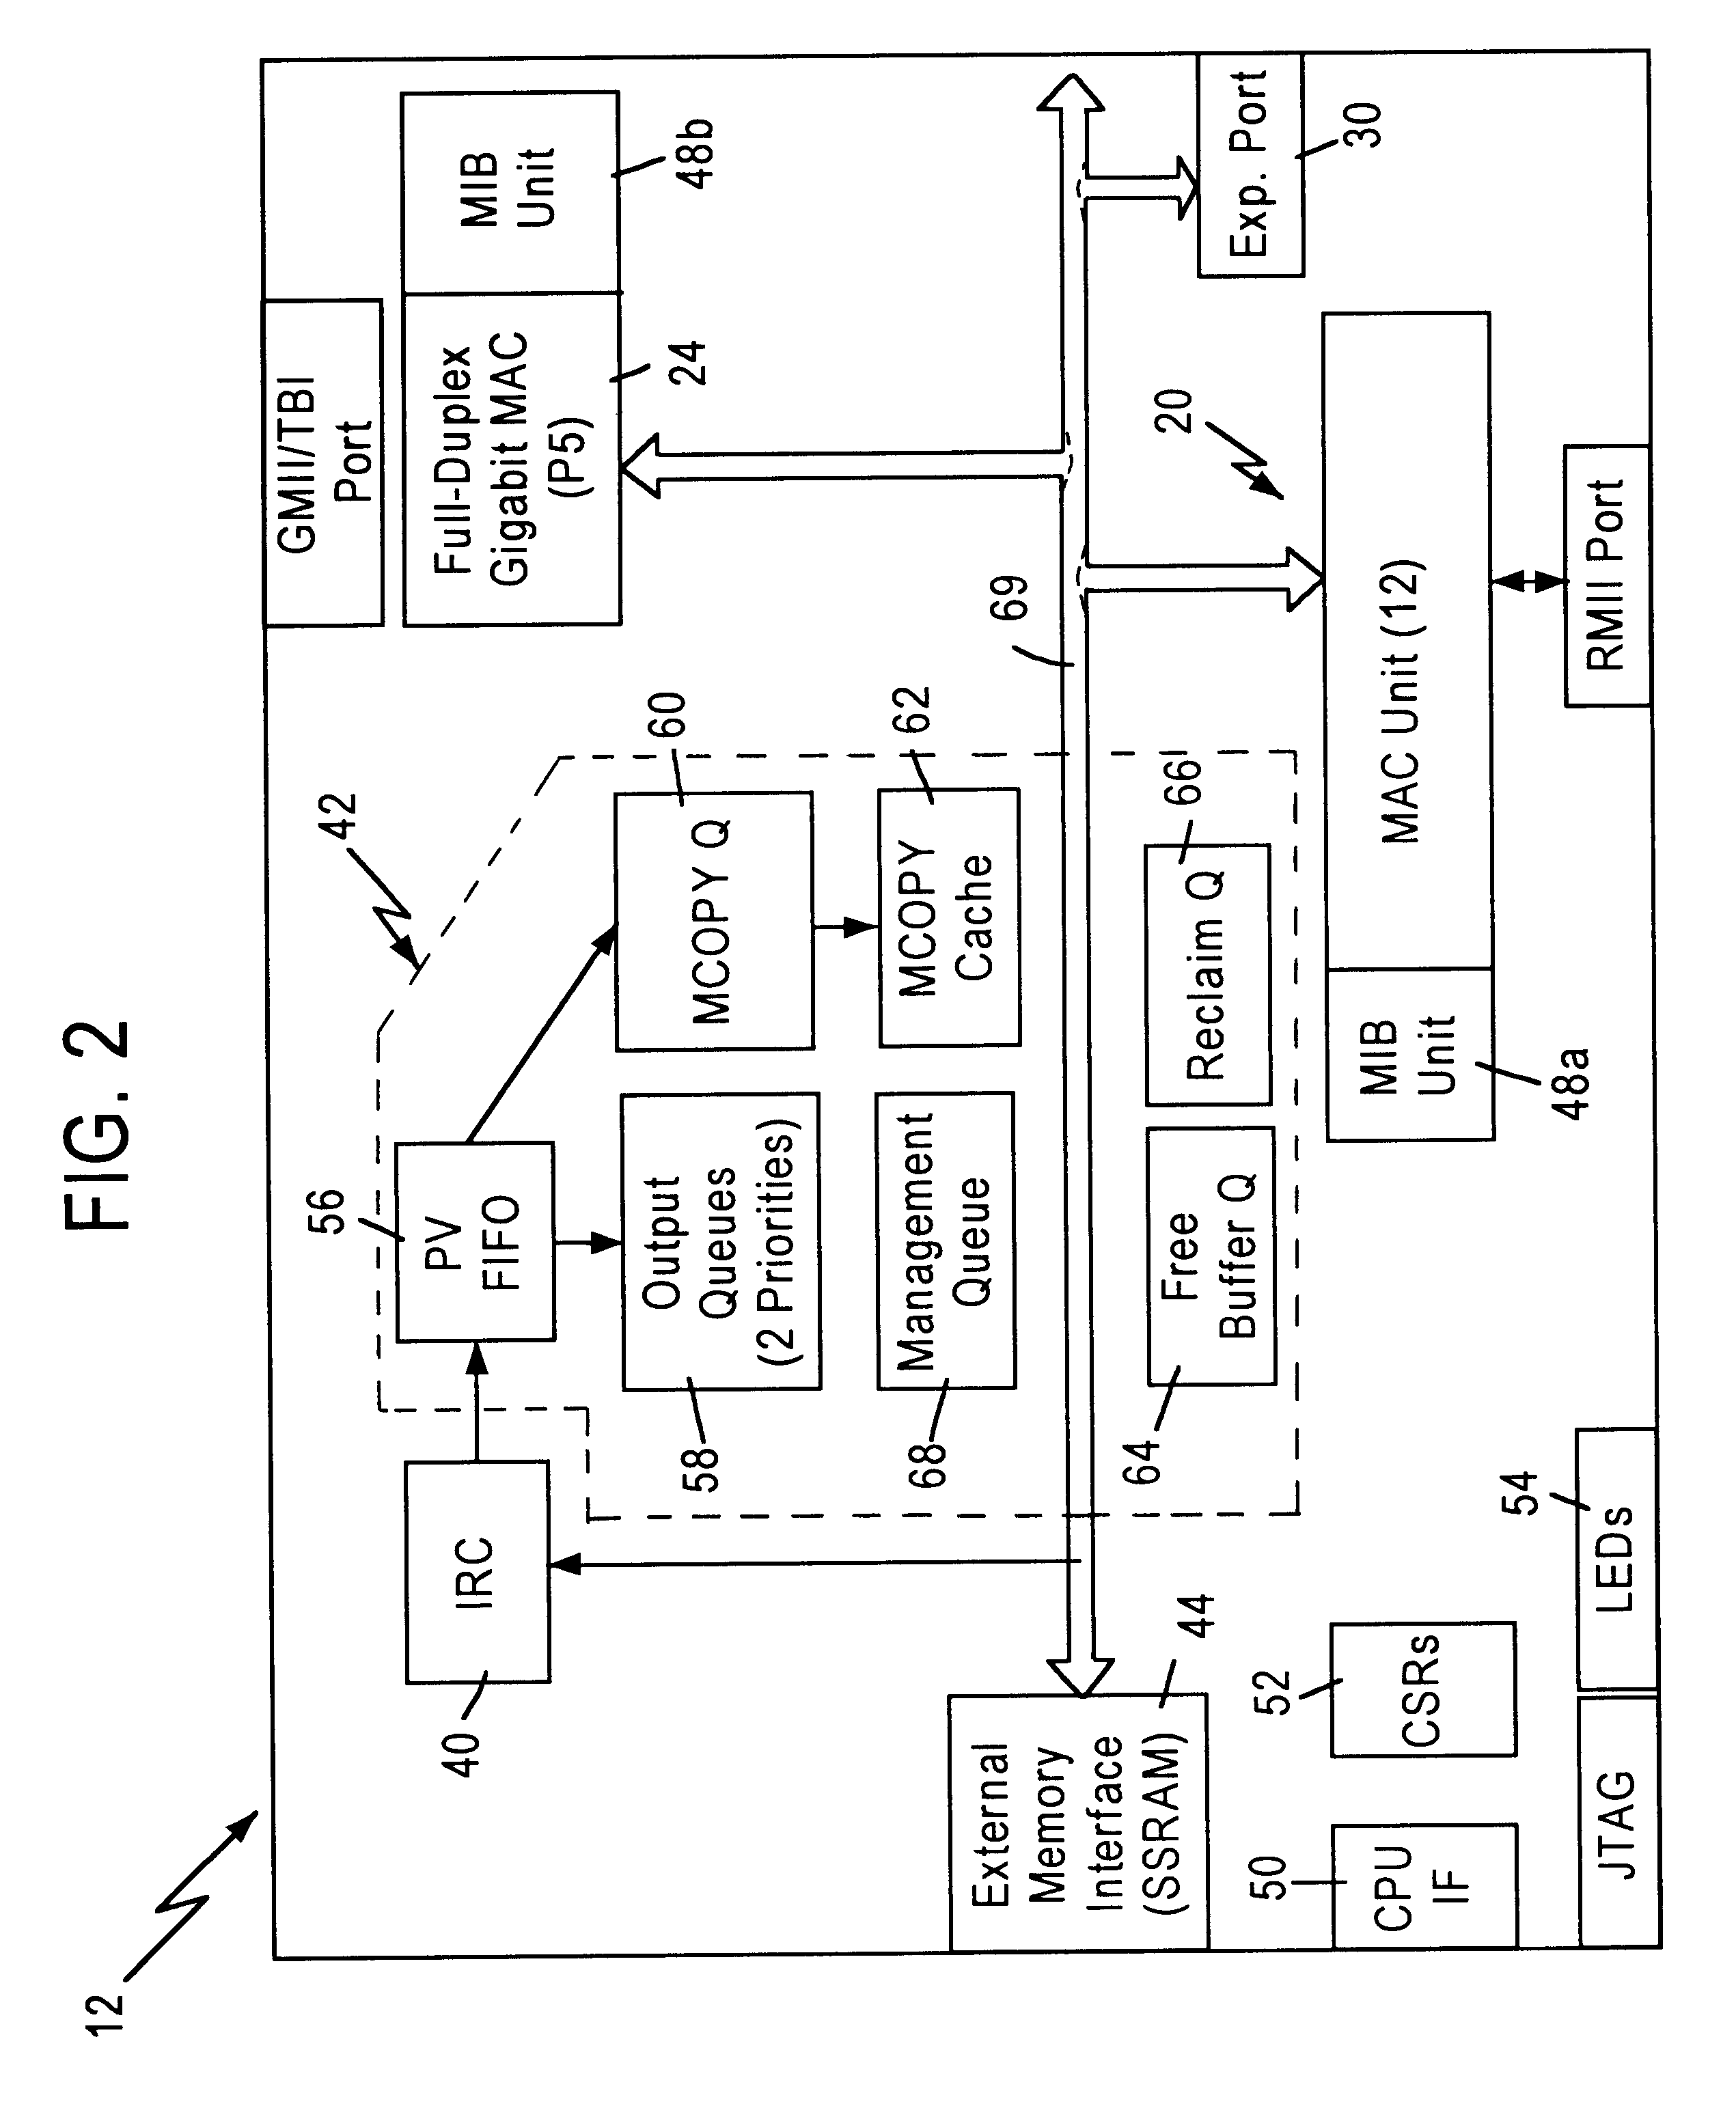 Method and apparatus for port vector determination at egress